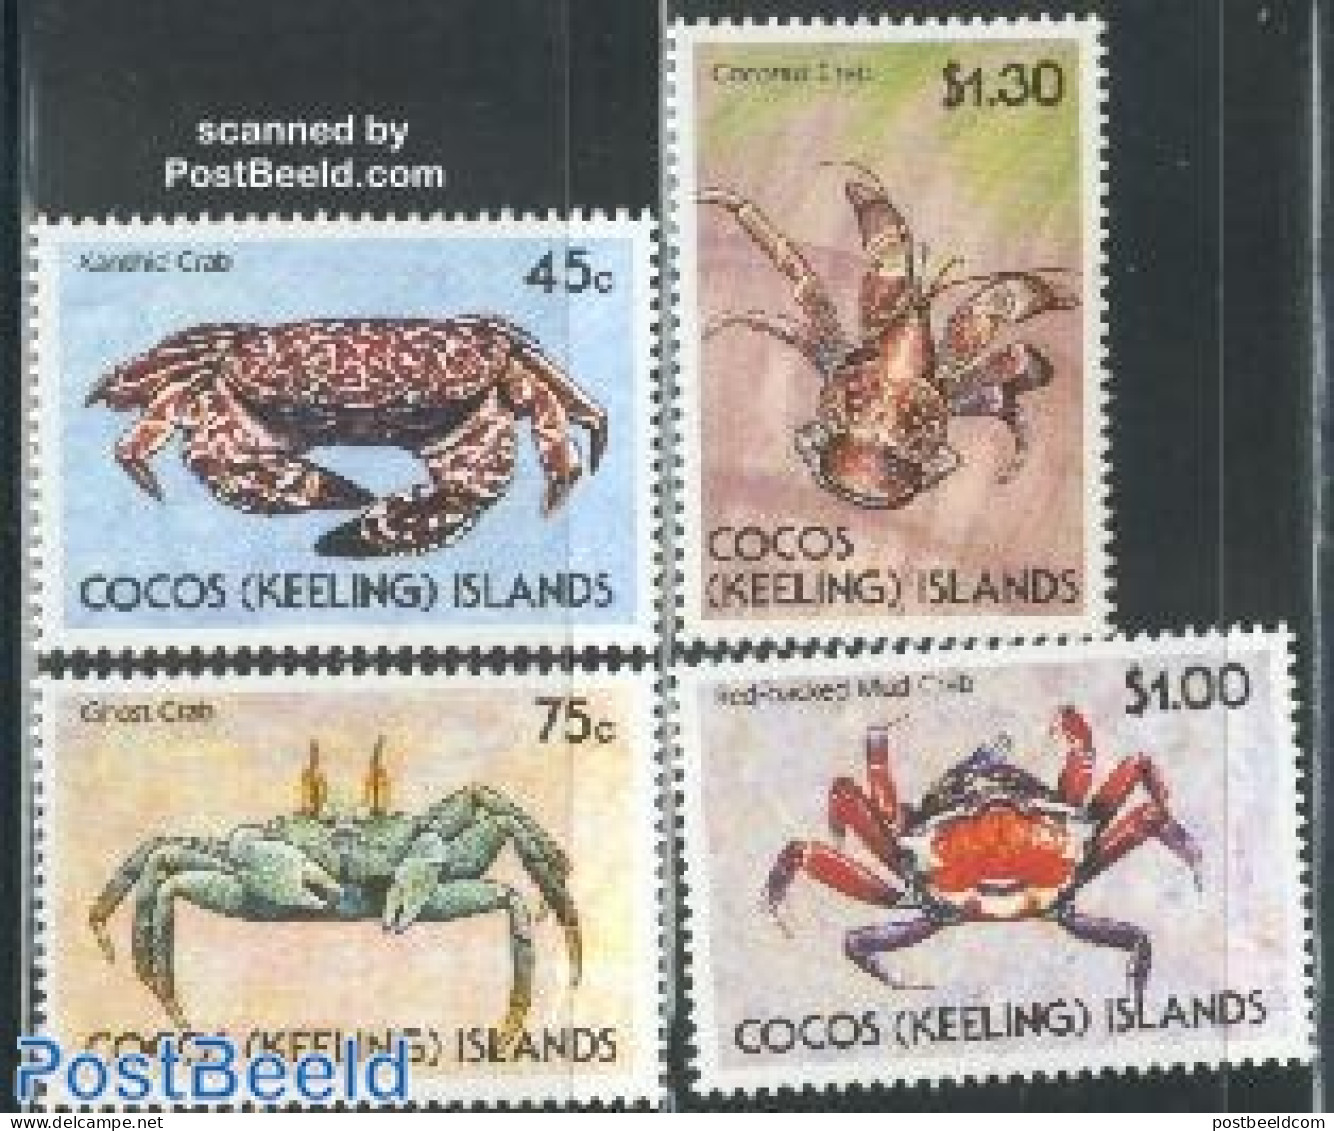 Cocos Islands 1990 Crabs 4v, Mint NH, Nature - Shells & Crustaceans - Crabs And Lobsters - Vie Marine